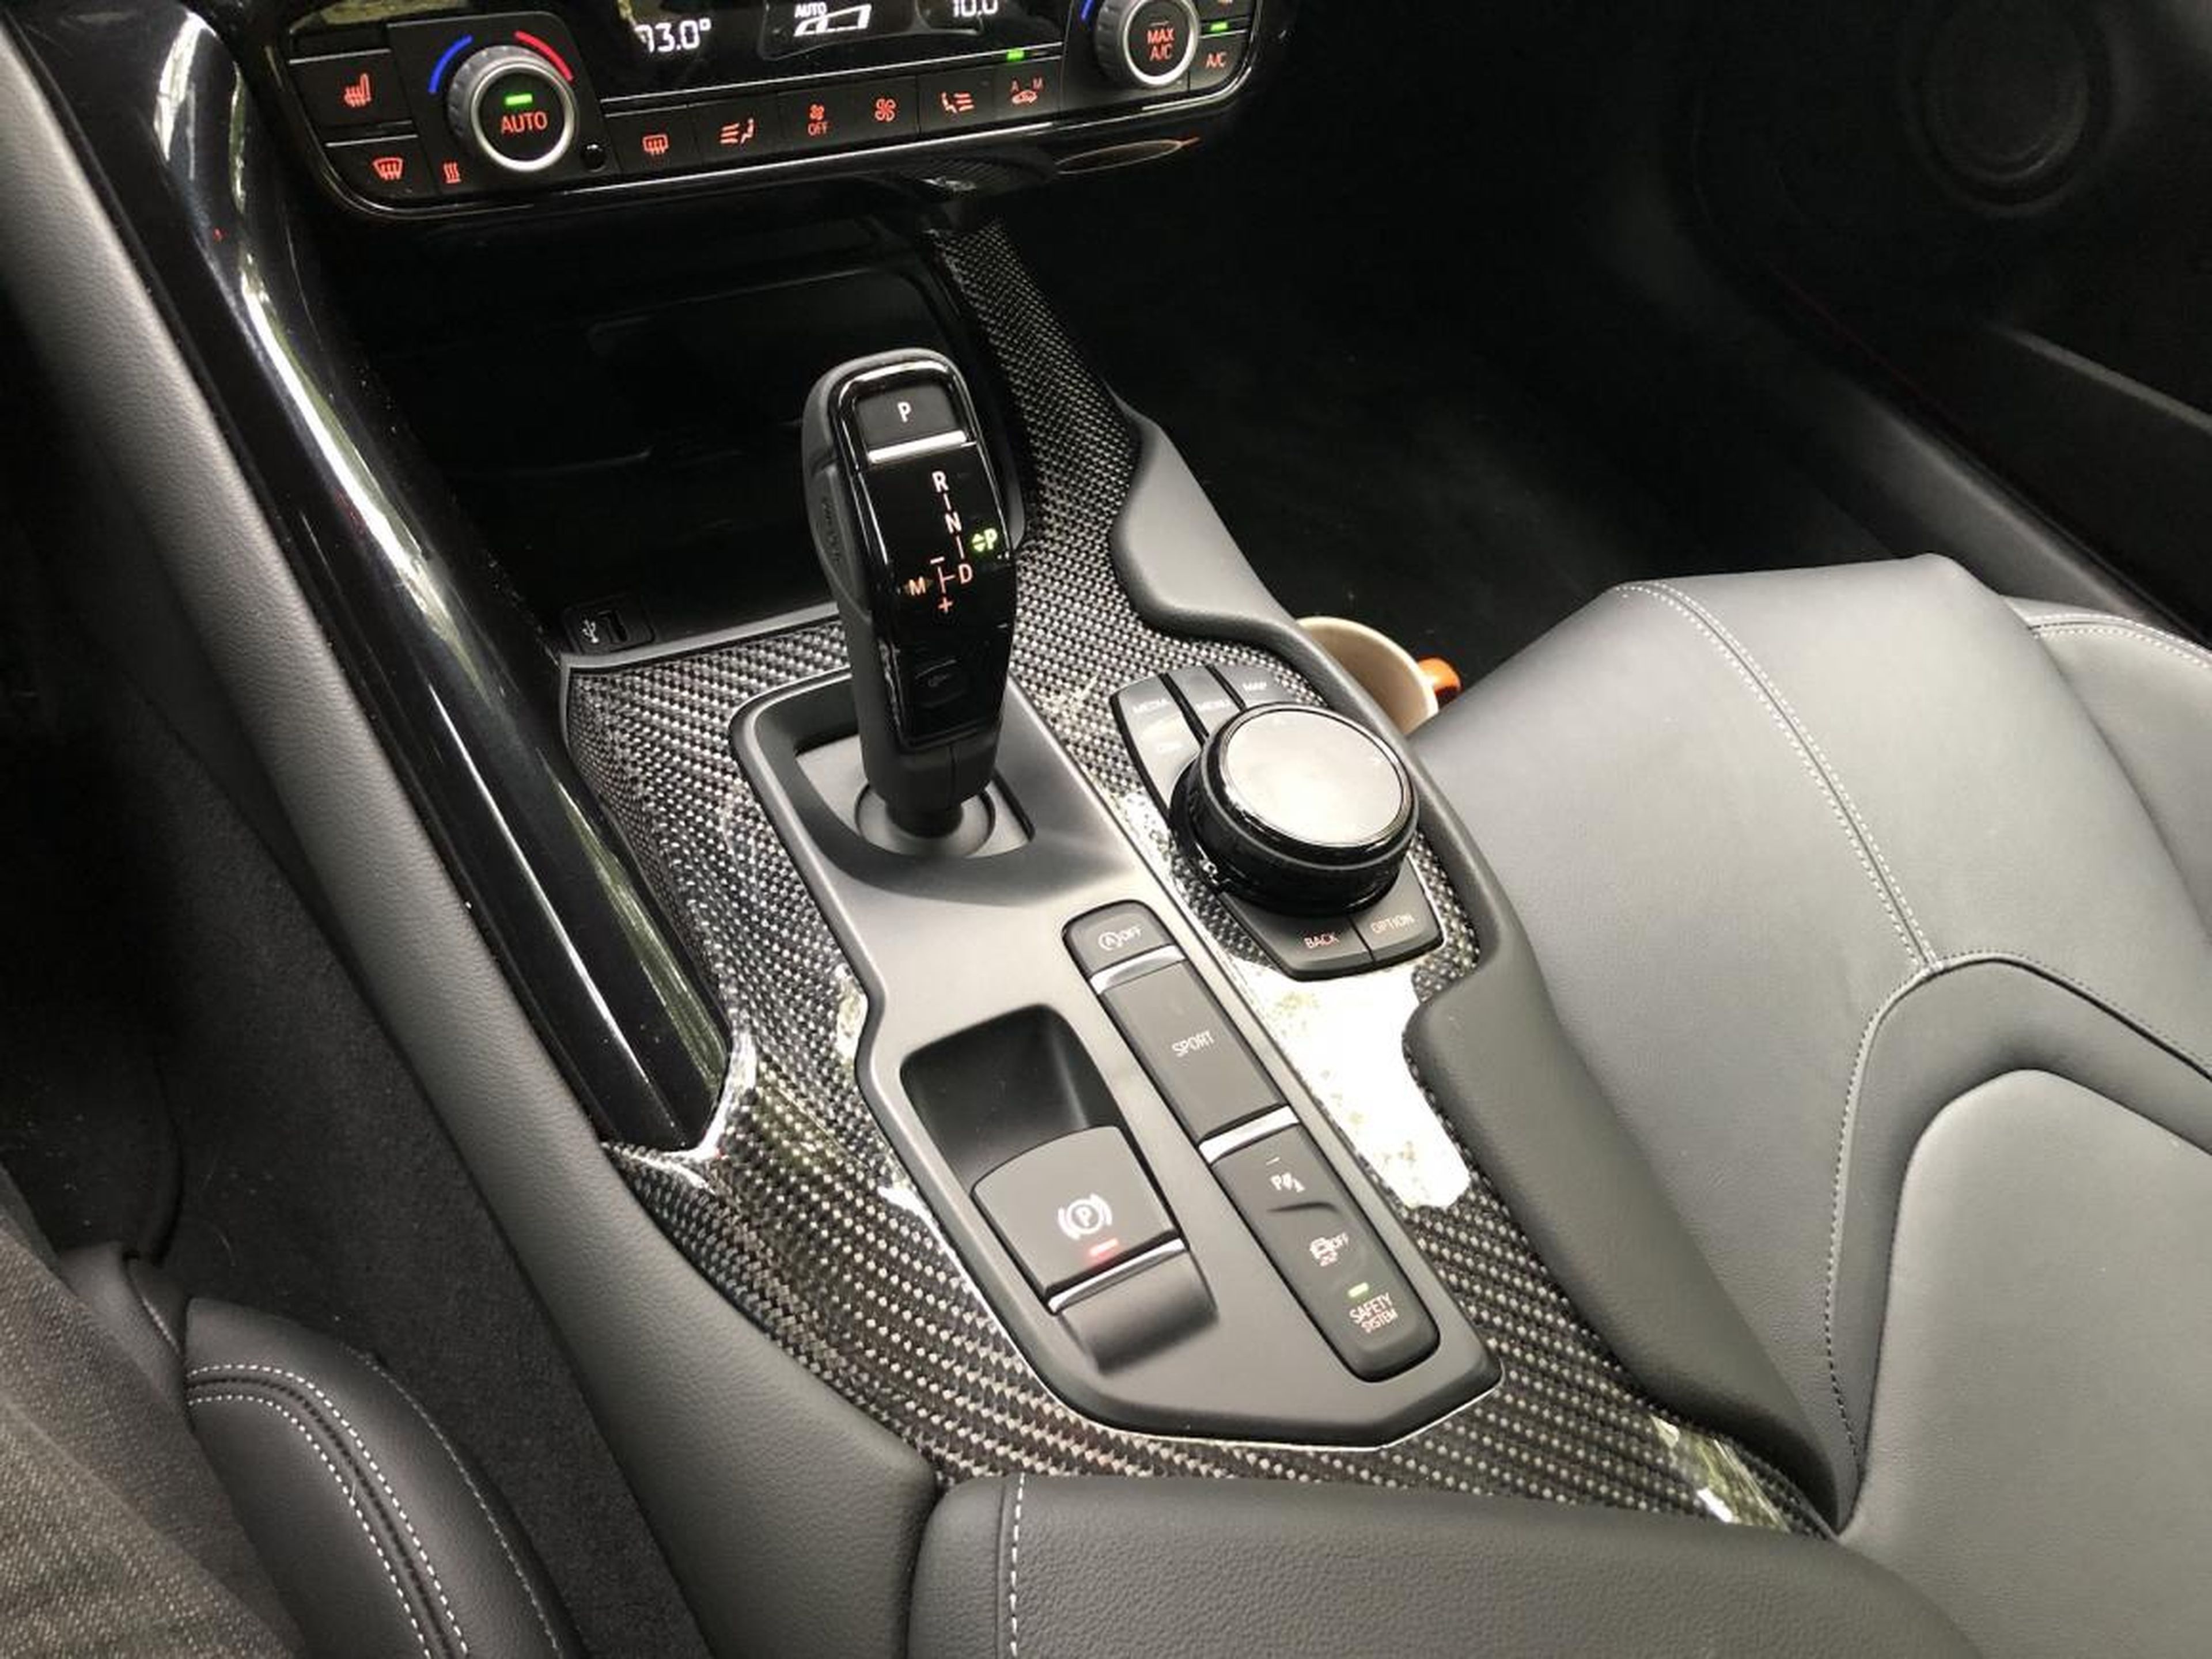 The carbon-fibre is a nice touch, and there isn't too much of it. The eight-speed transmission is a BMW unit, as is the odious toggle shifter. There is, sadly, no available stick-shift. Yet.